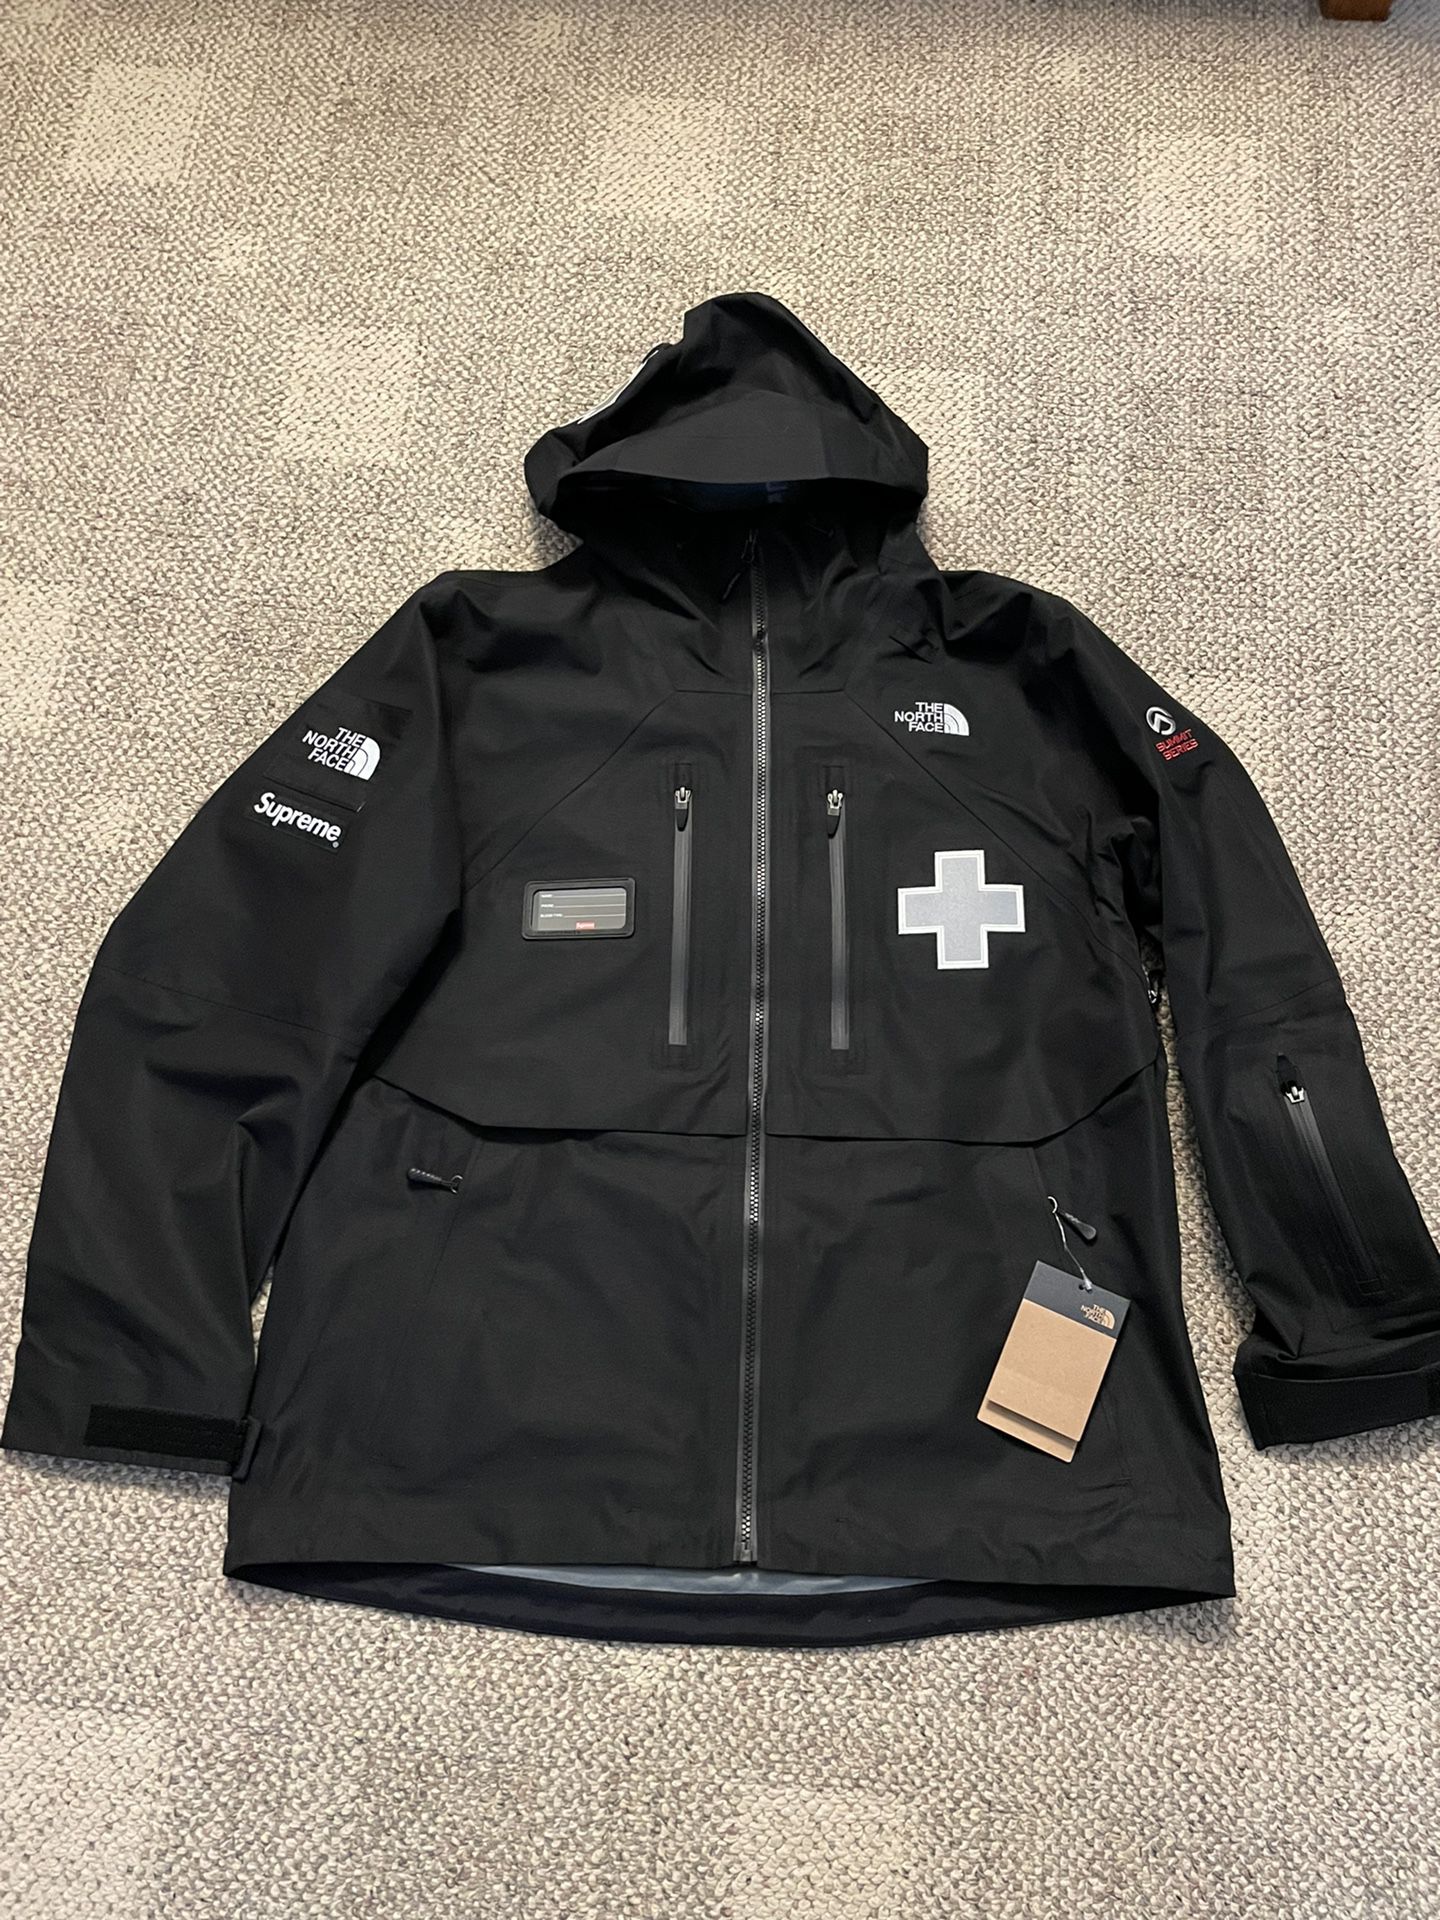 Nike x The North Face Summit Series Jacket